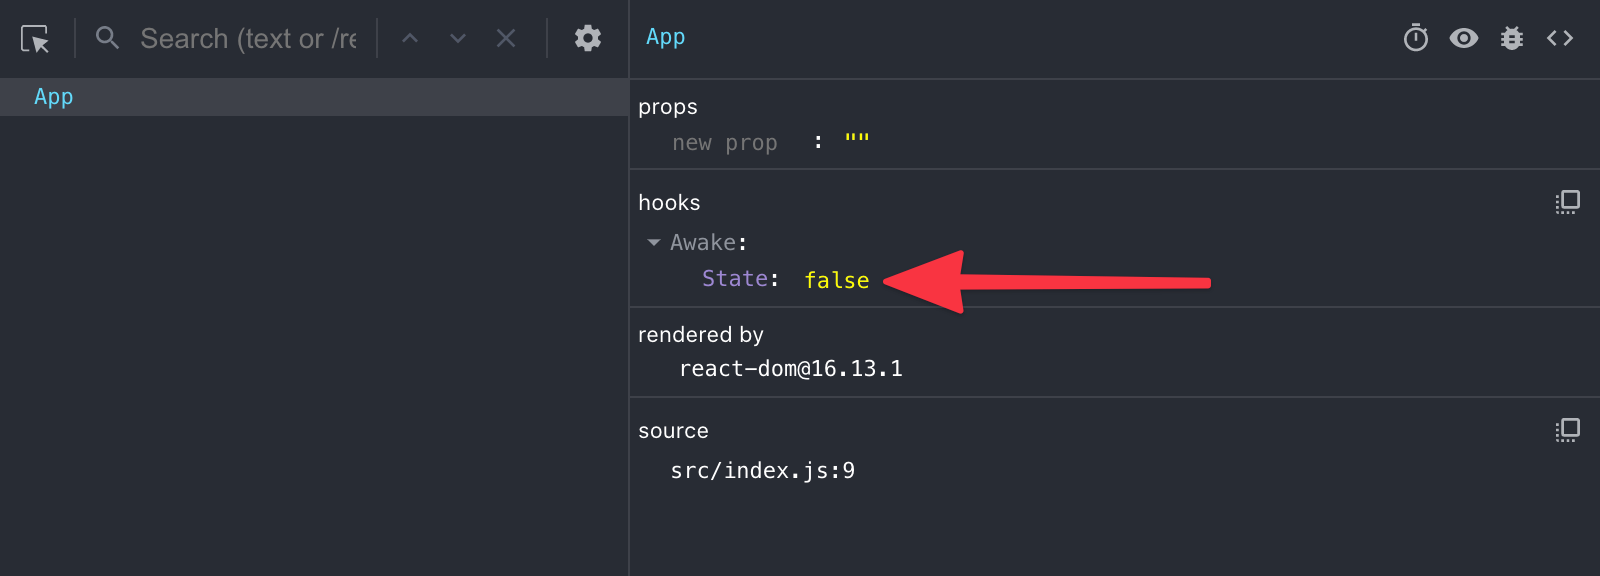 React Hooks Documentation: An Easy to Read Version